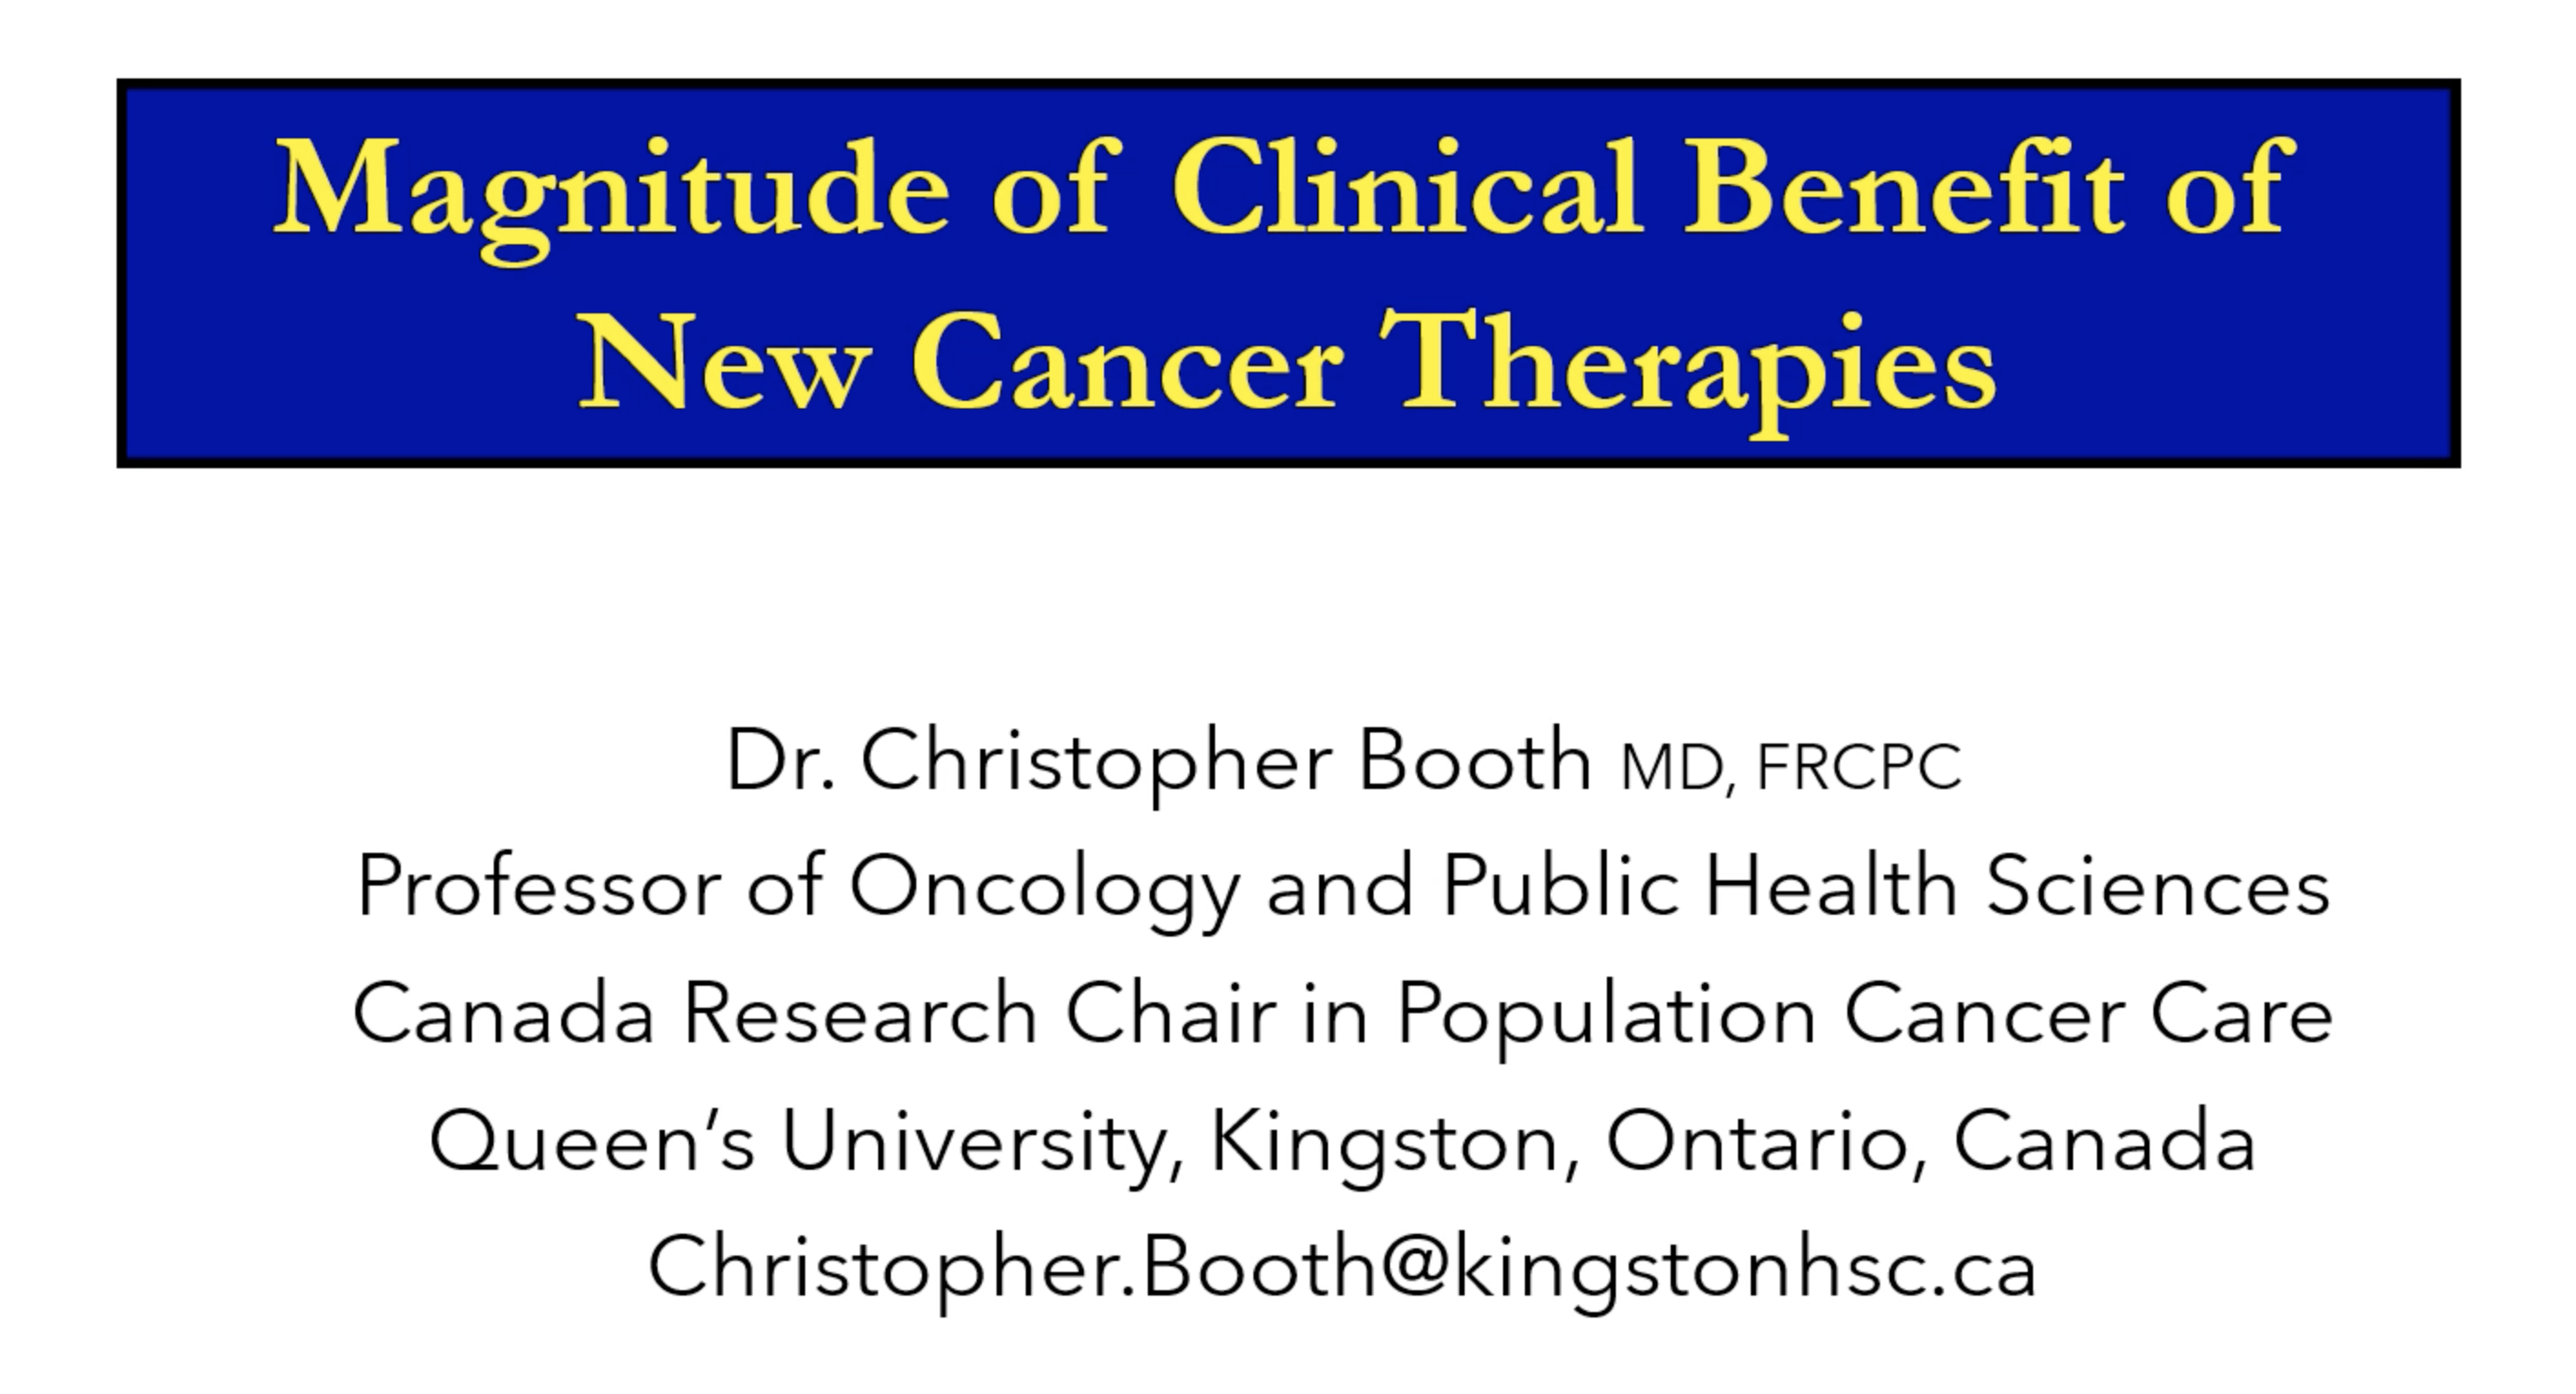 Magnitude of Clinical Benefit of New Cancer Therapies